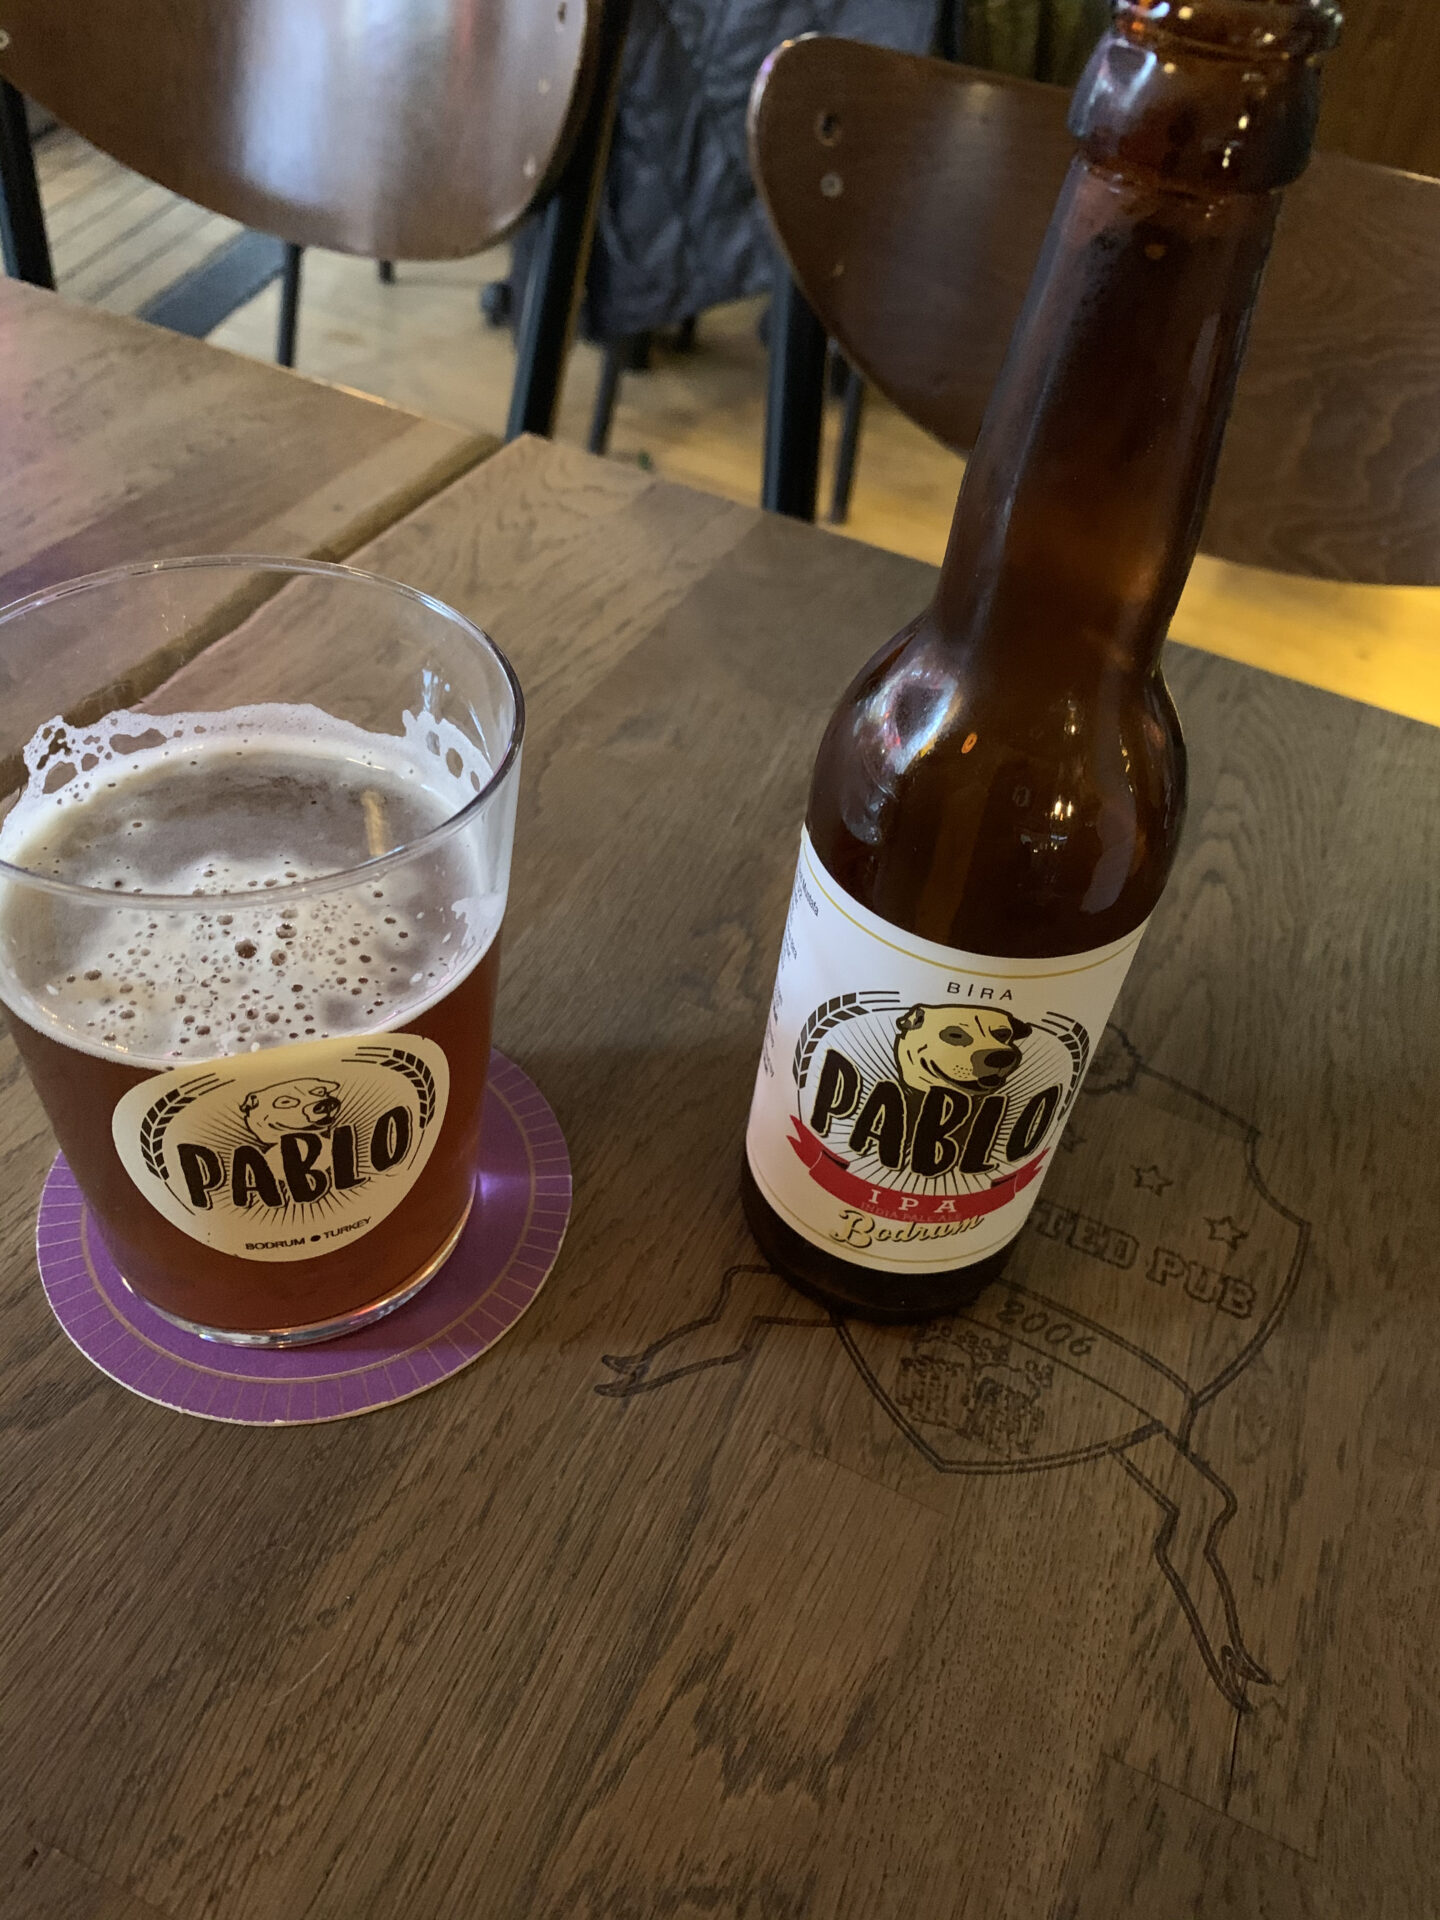 A bottle and a glass of beer from the same company, Pablo